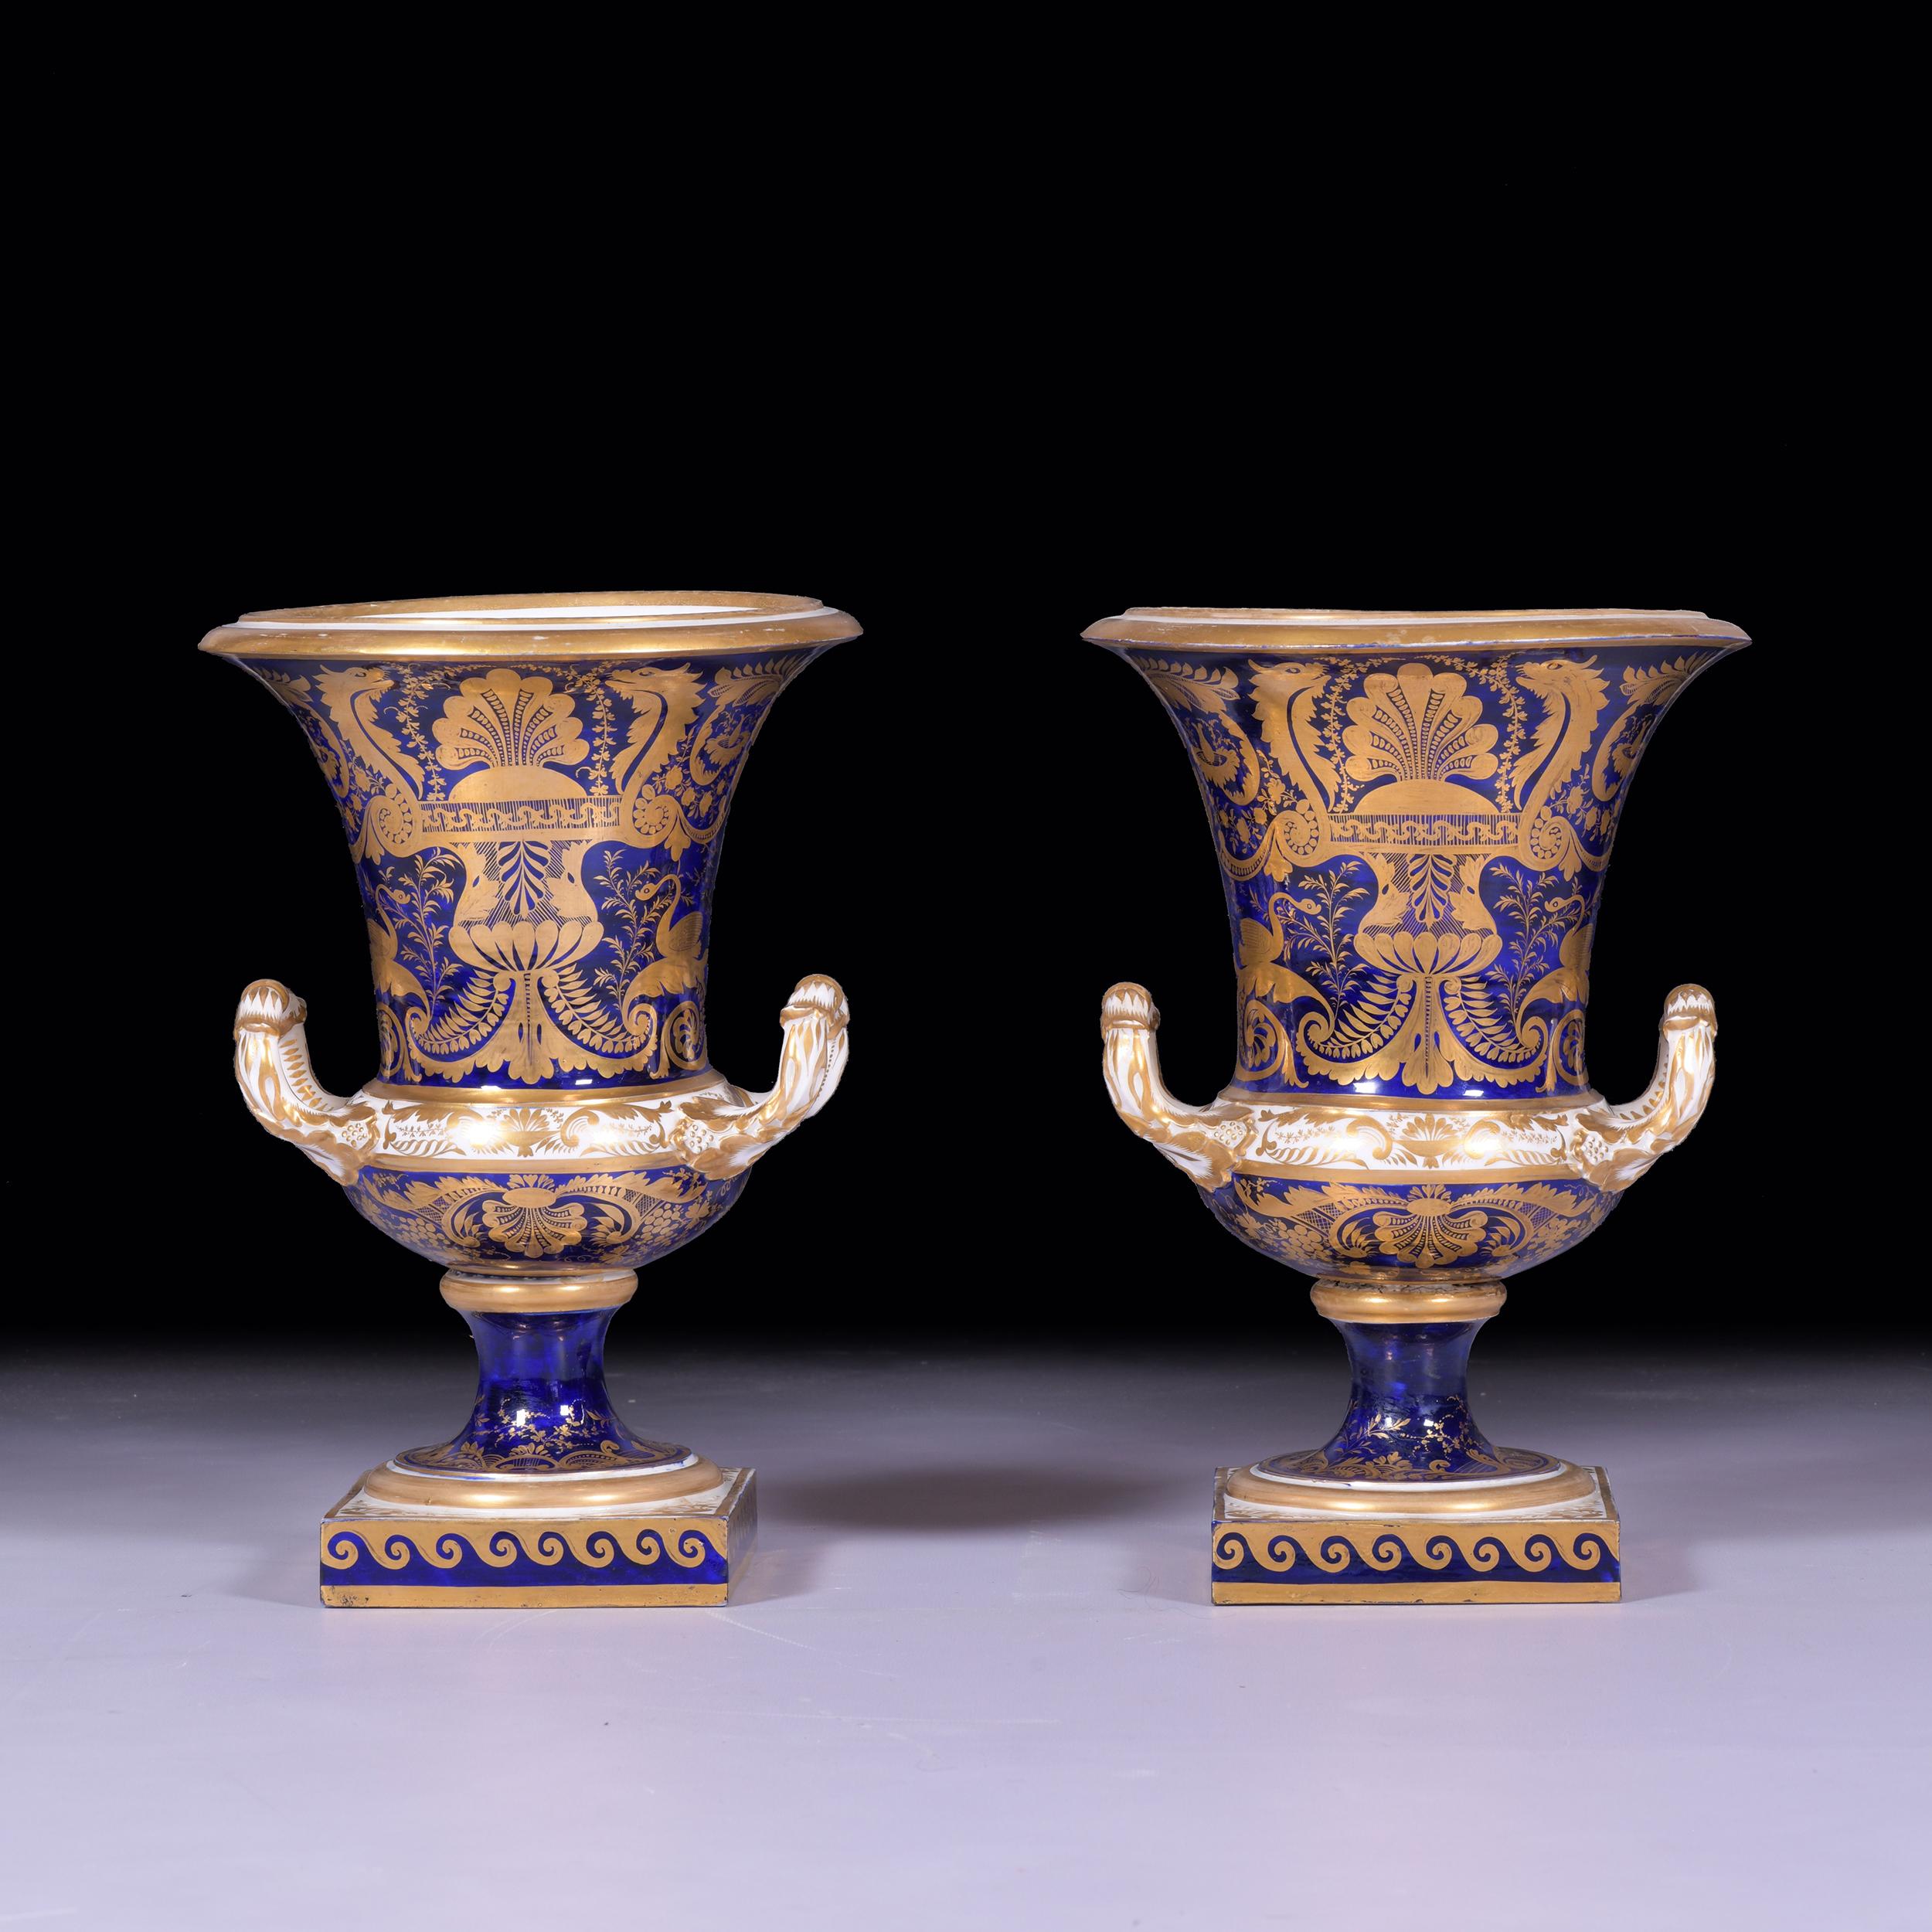 Porcelain Pair of Early 19th Century English Royal Crown Derby Cobalt Blue Campana Vases